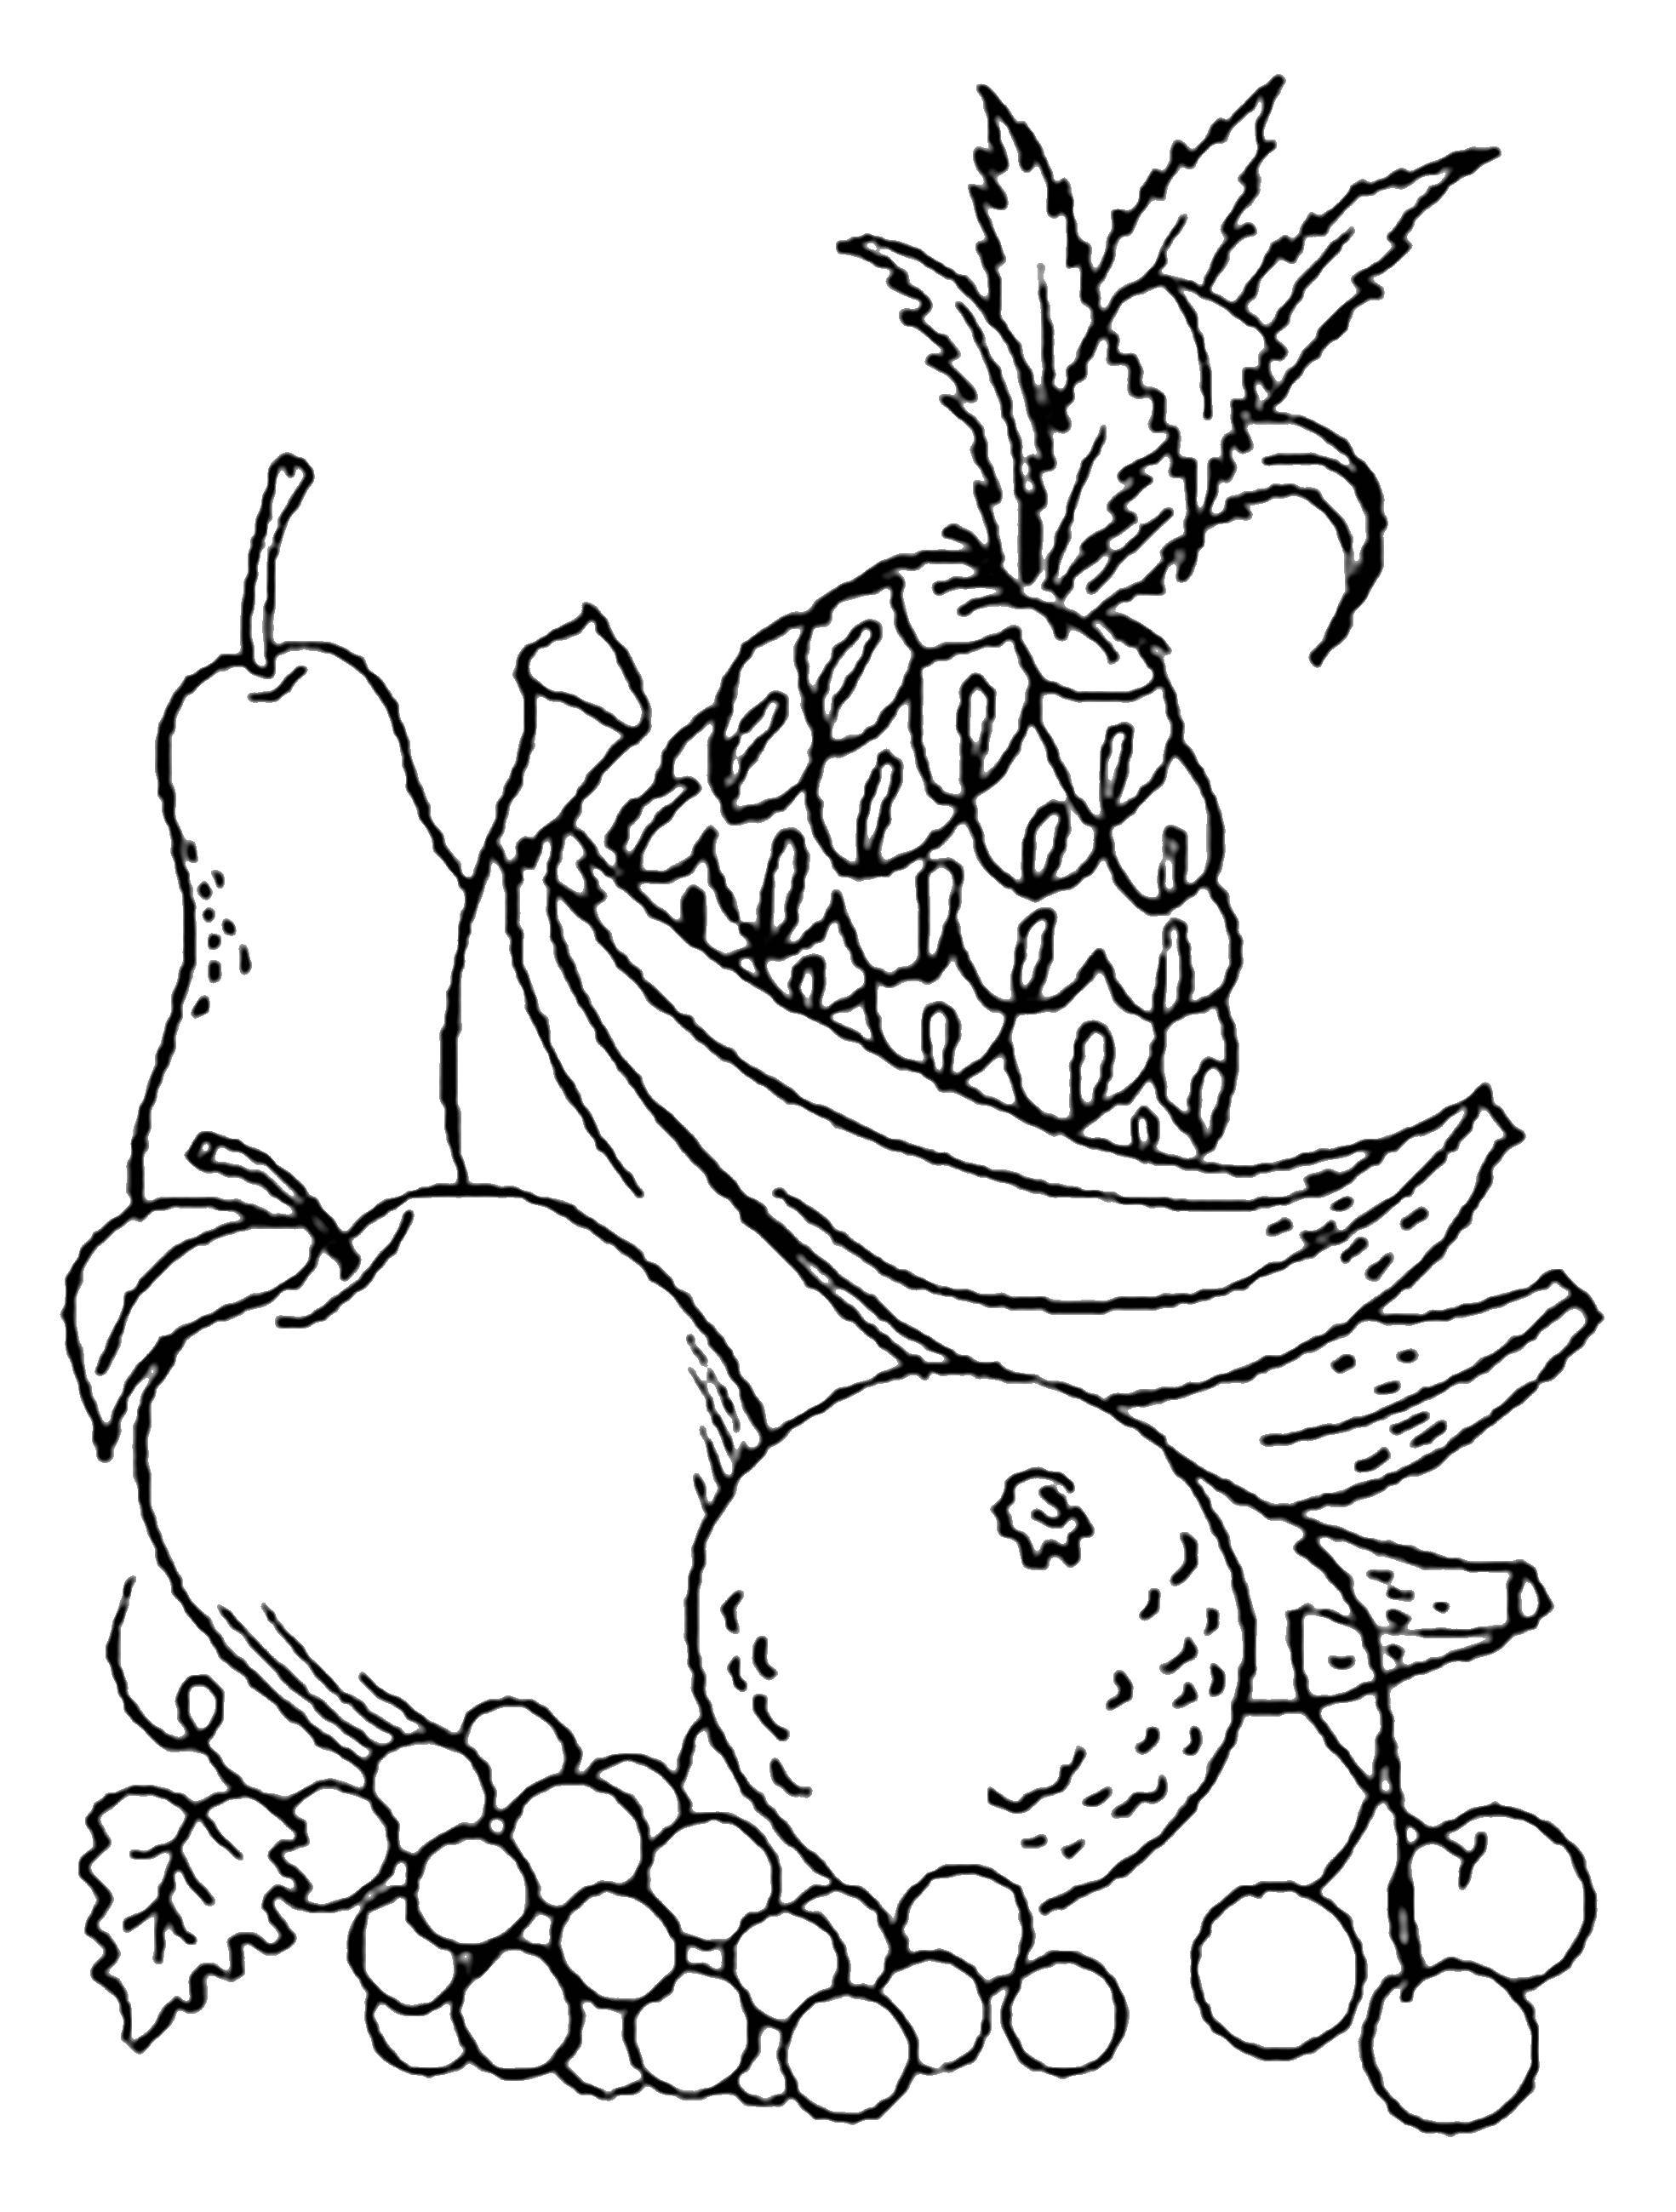 Coloring Fruit. Category fruits. Tags:  fruits.